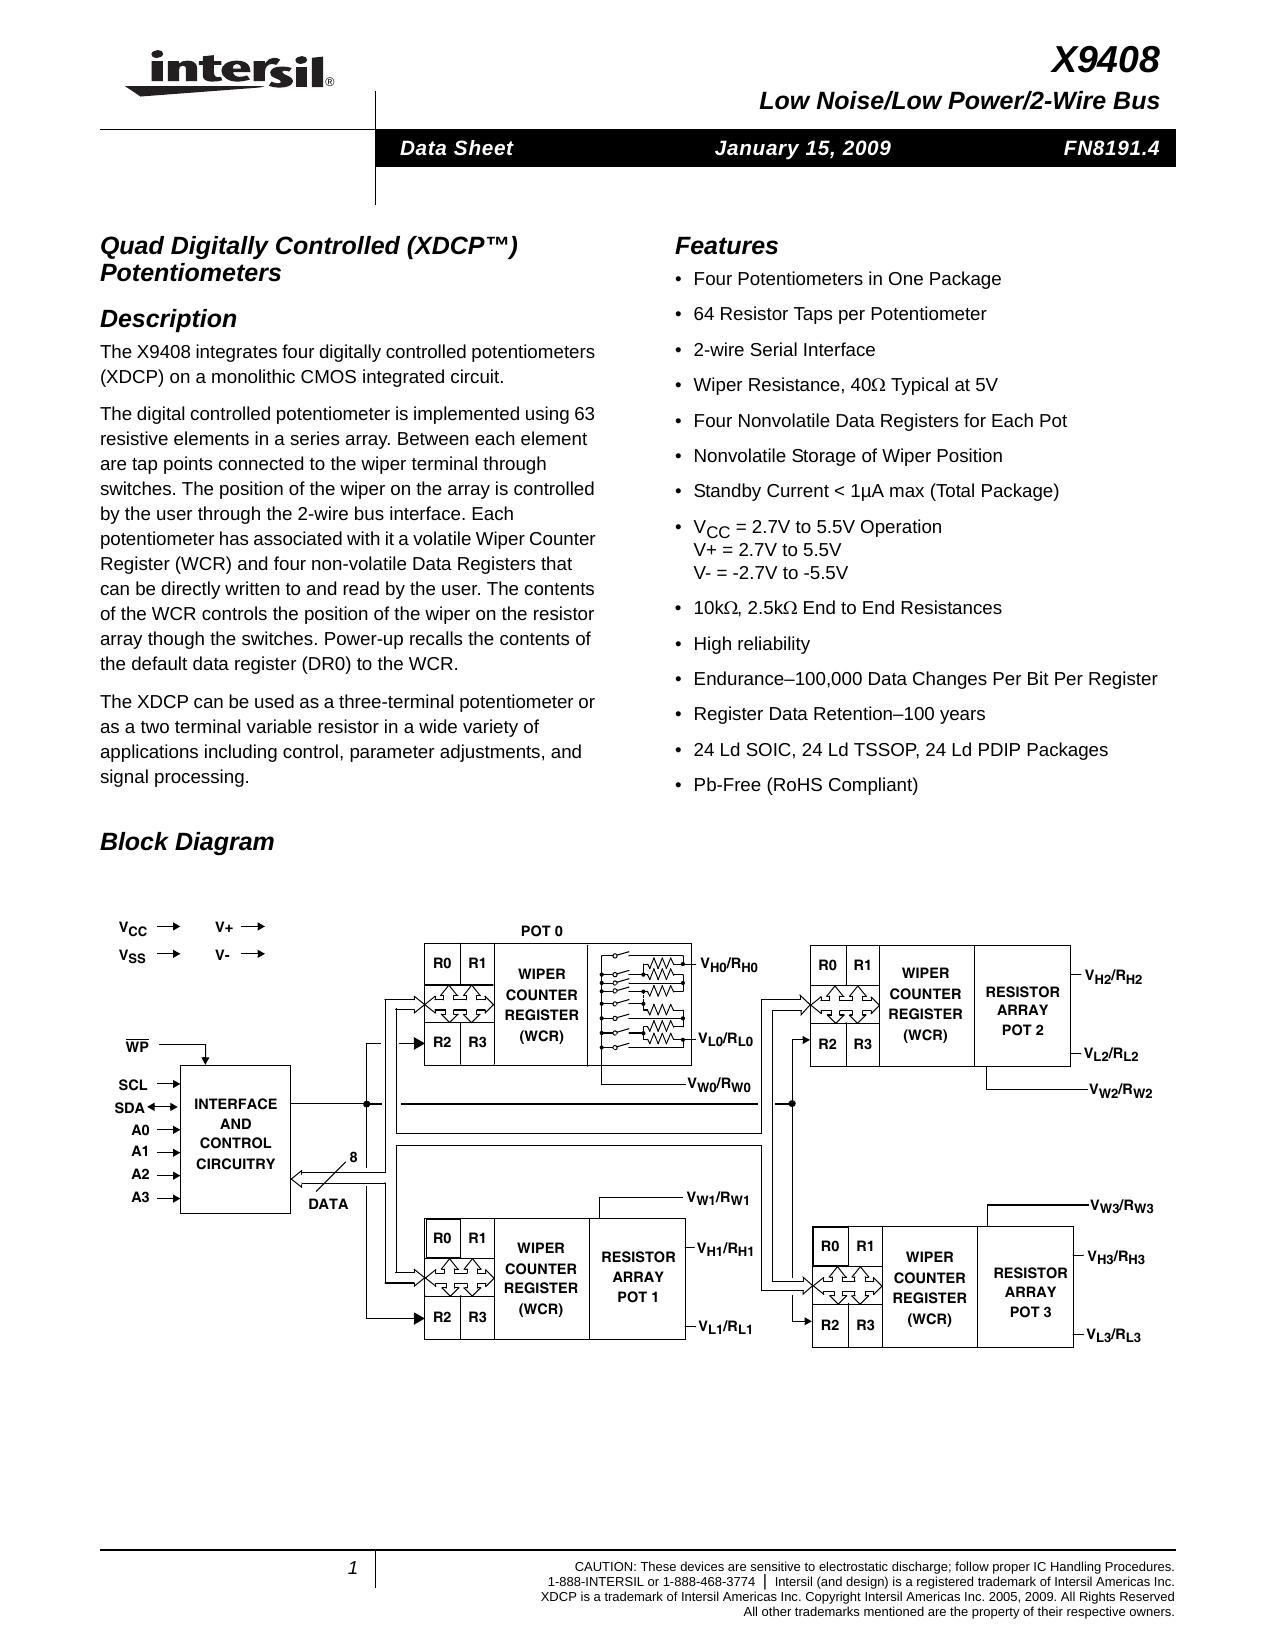 x9408-low-noise-low-power-2-wire-bus-quad-digitally-controlled-potentiometers-xdcp.pdf